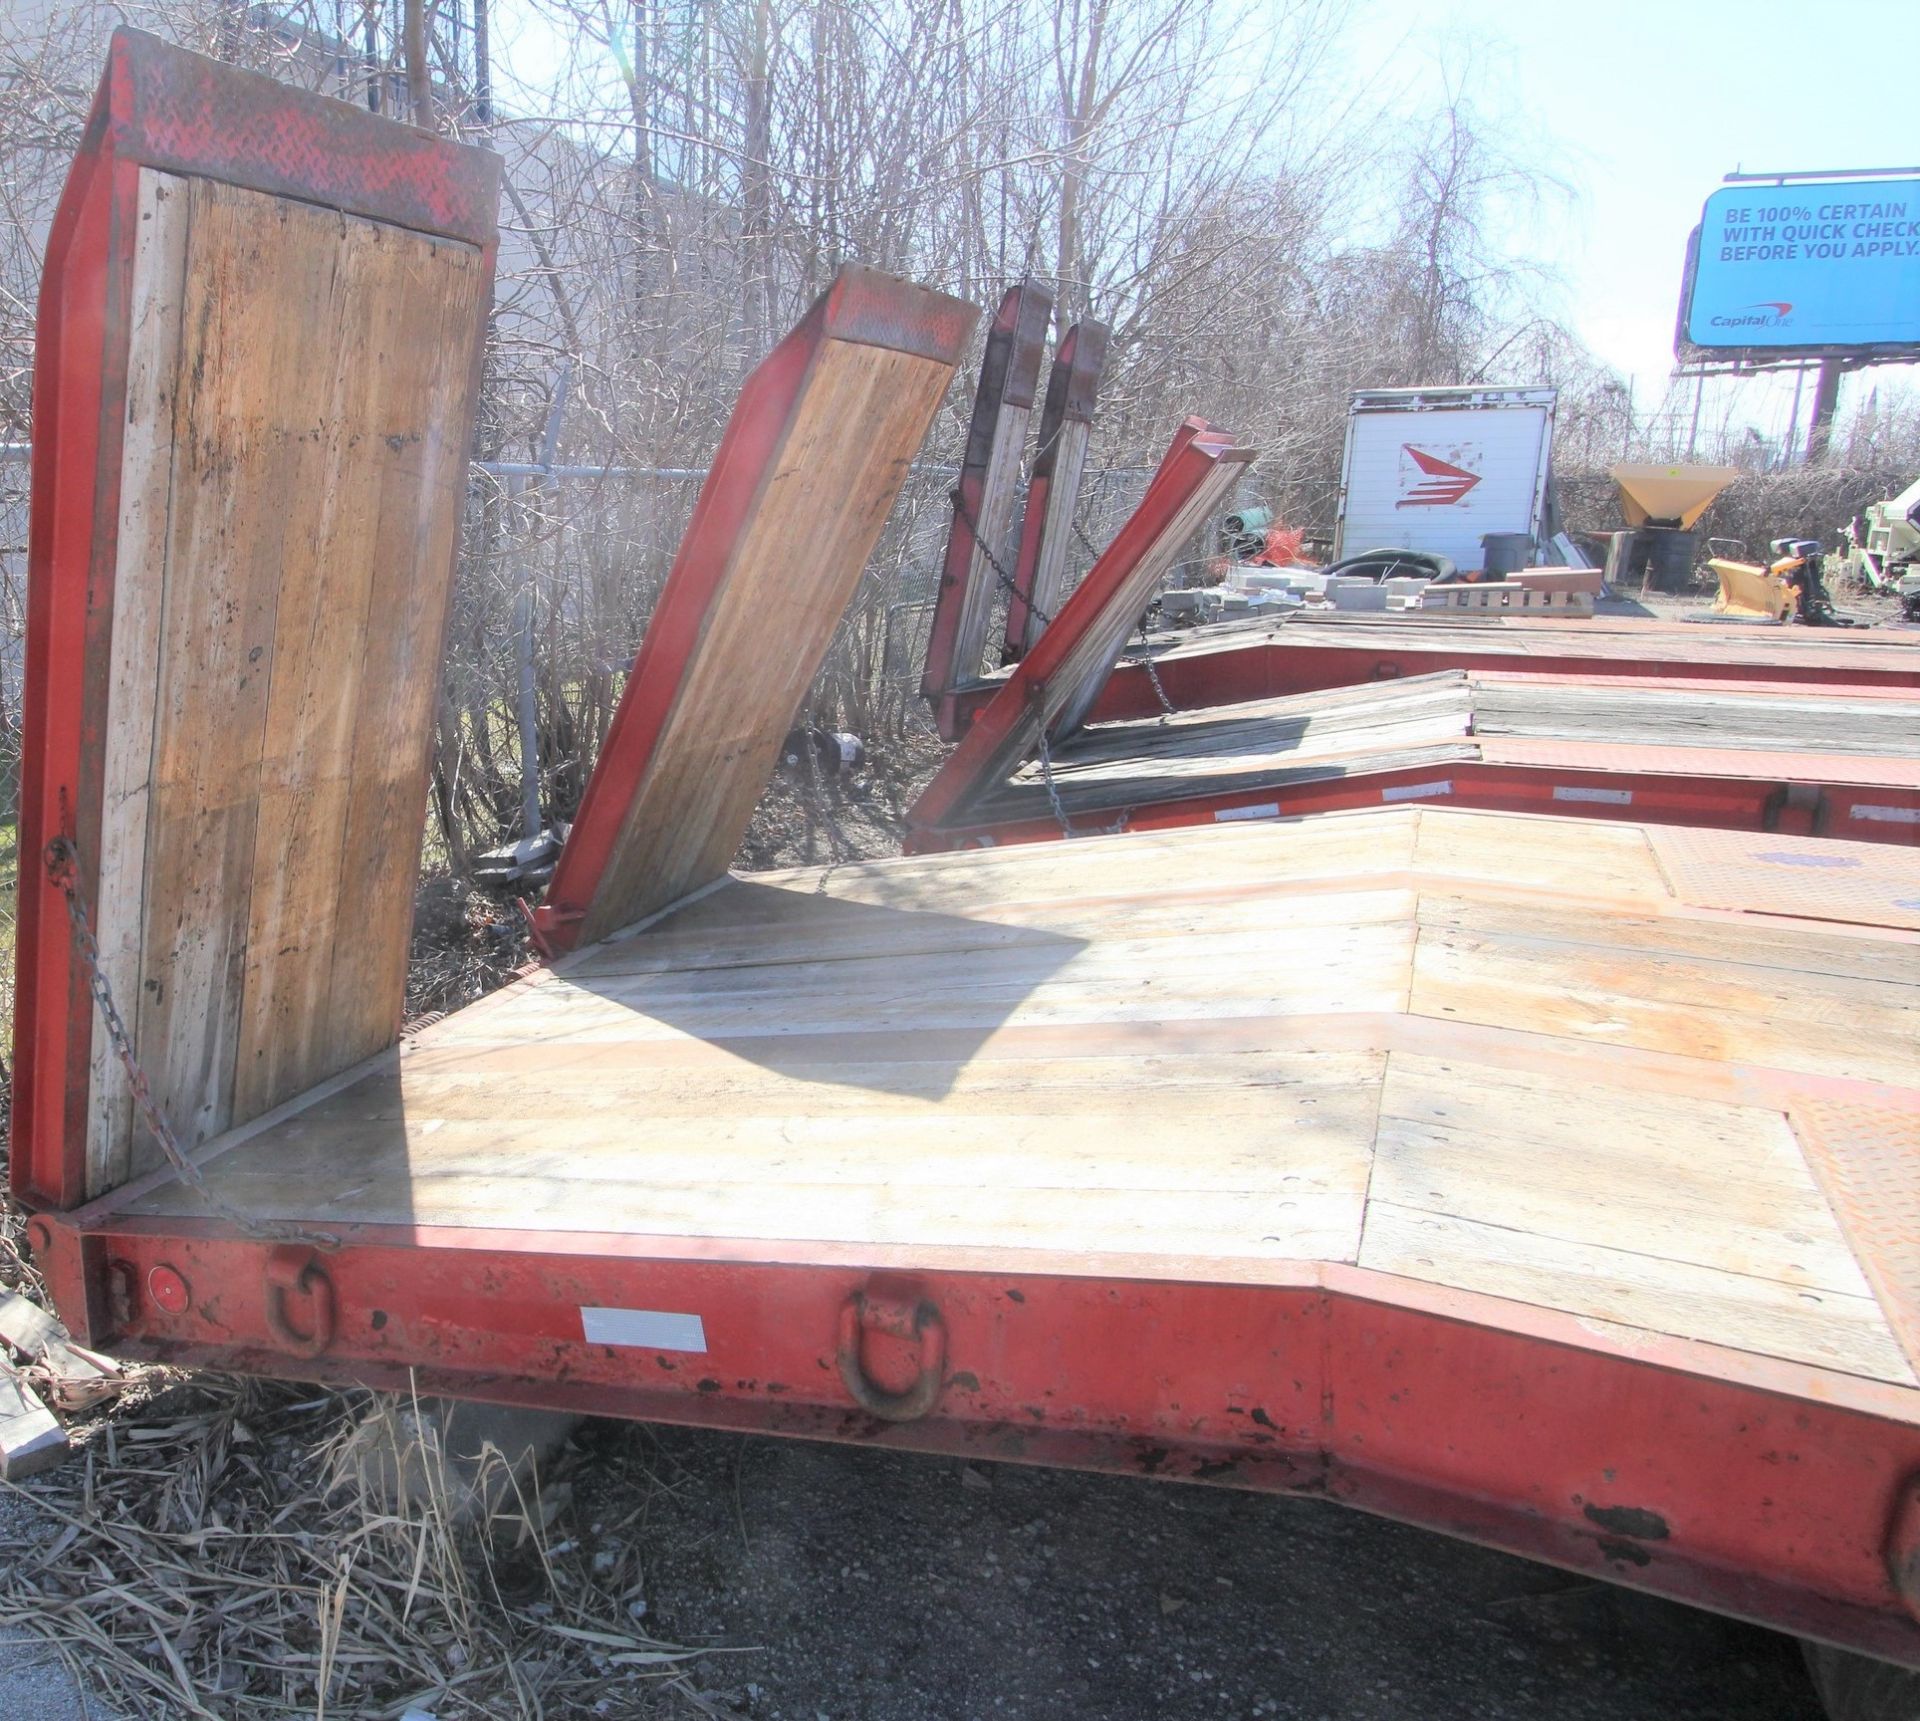 J.C. TRAILERS 26' TANDEM AXLE EQUIPMENT TRAILER, 18,000 LBS. MAX CAPACITY, WOOD DECK, DECK-OVER- - Image 5 of 11